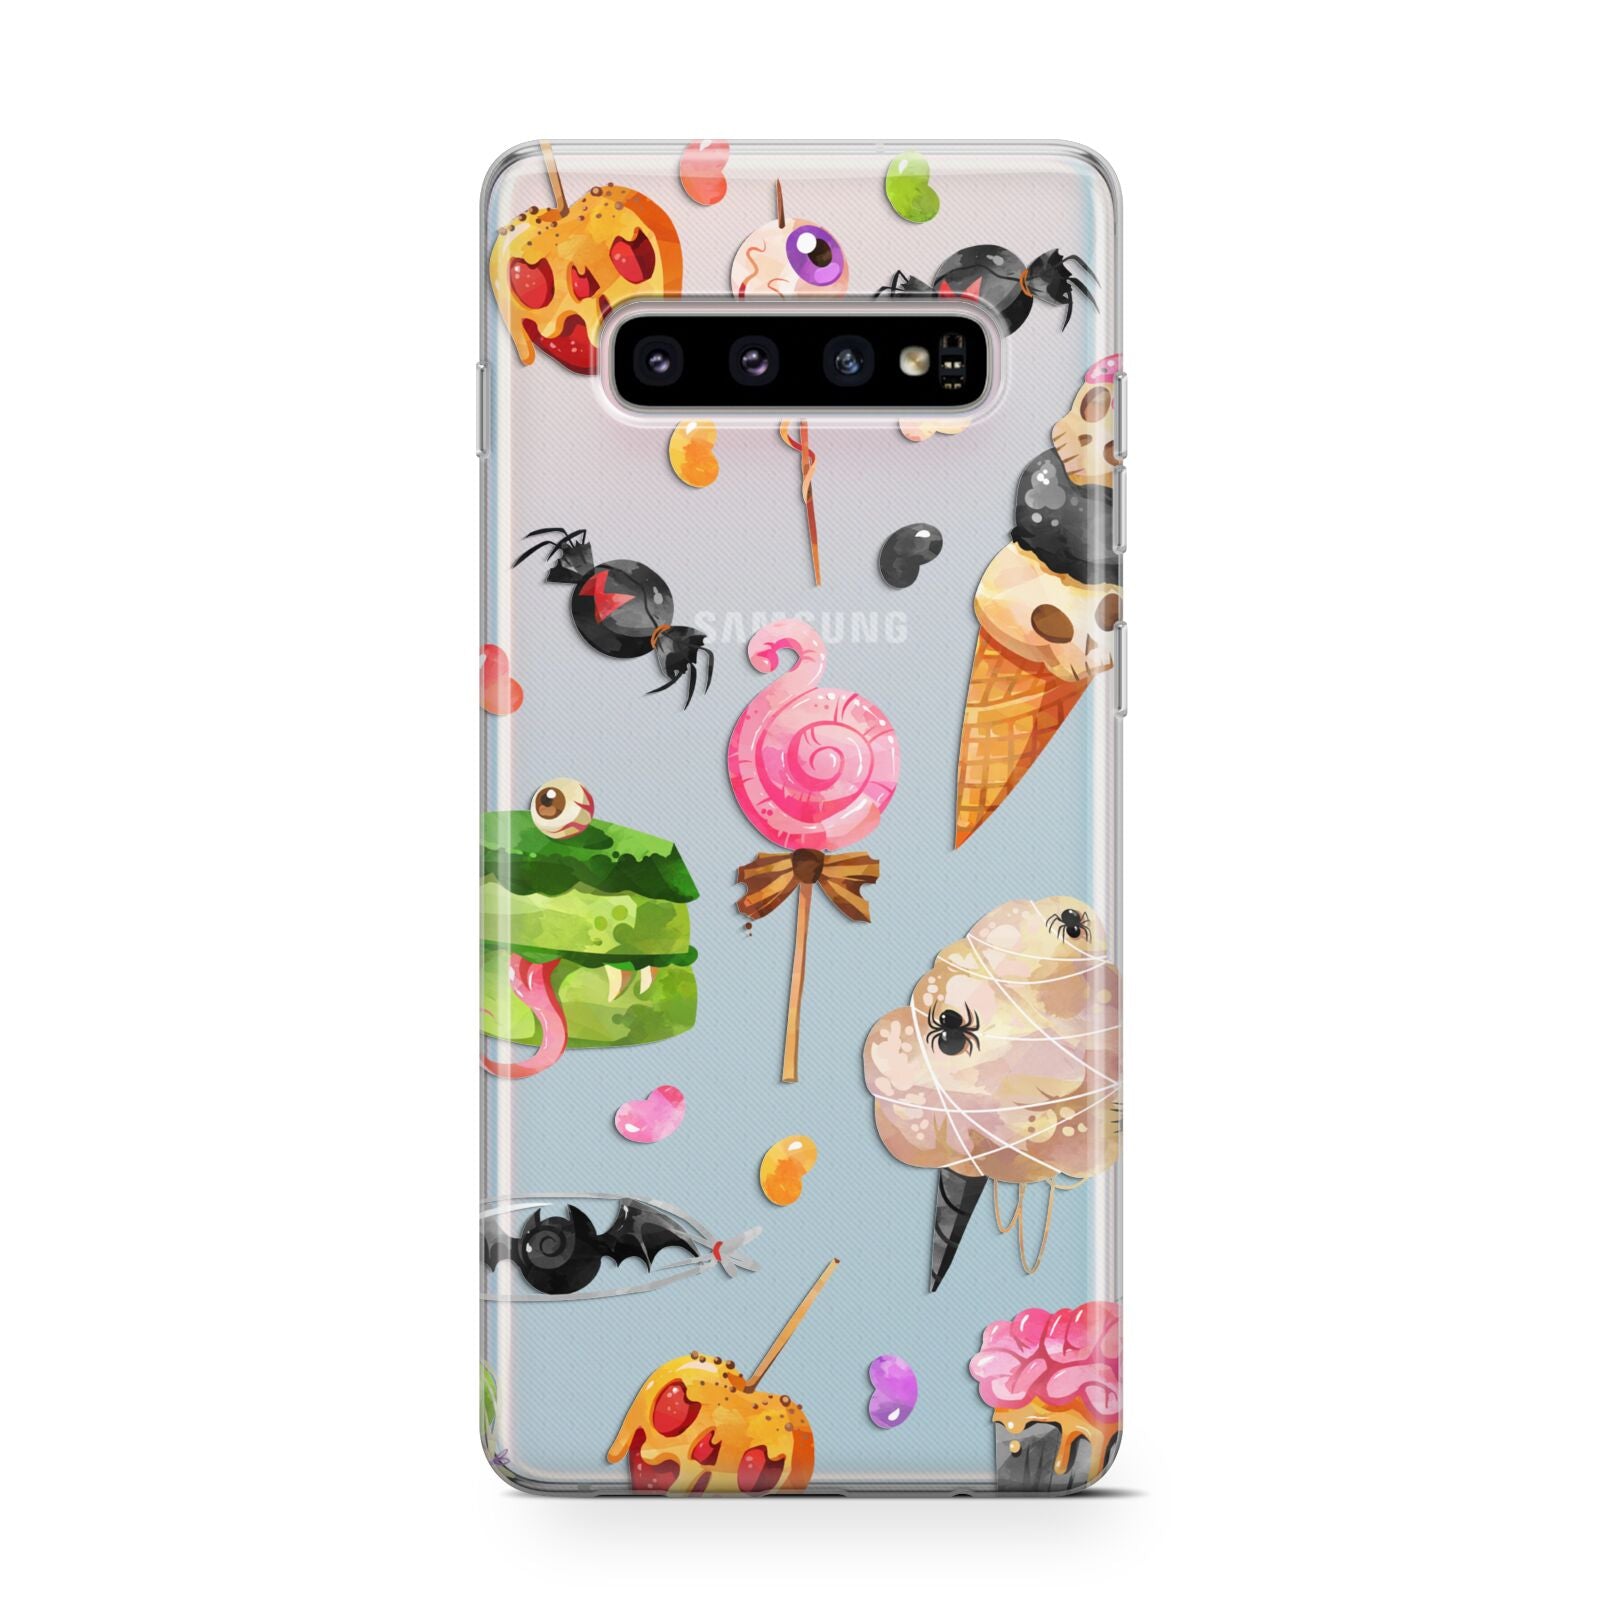 Halloween Cakes and Candy Samsung Galaxy S10 Case